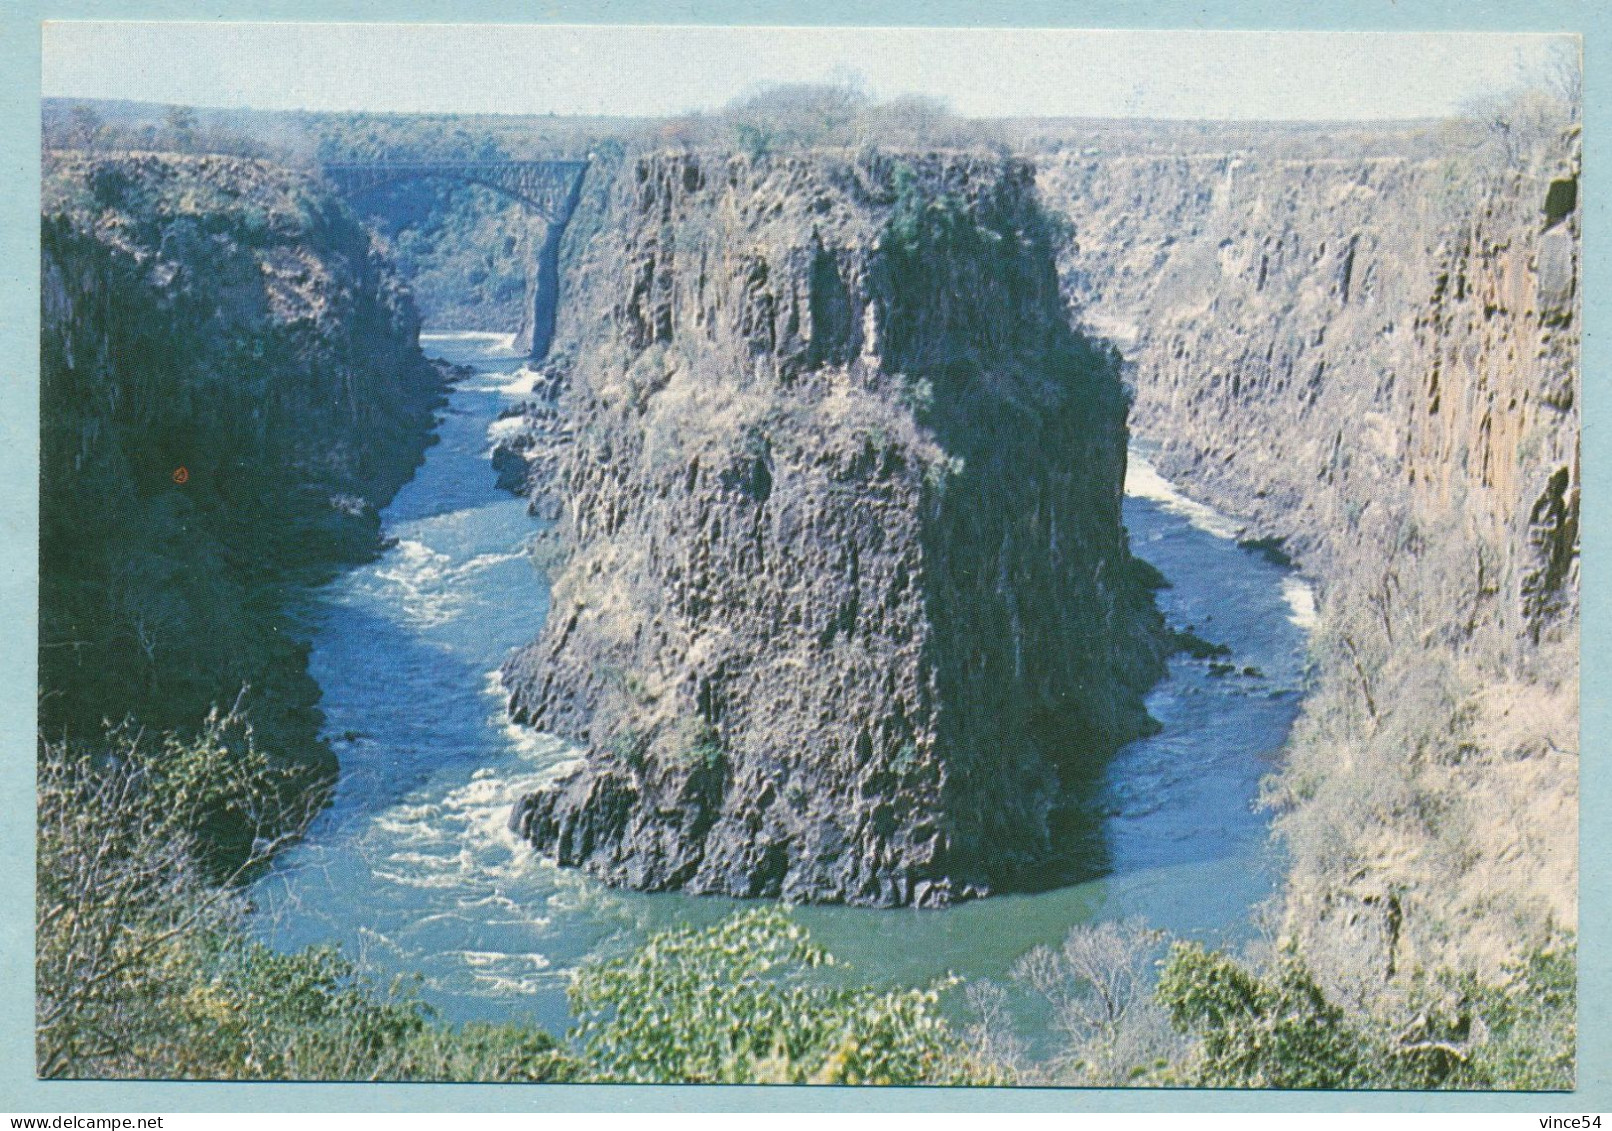 Showing The First And Second Gorge Below The Victoria Falls - Rhodesia - Zimbabwe